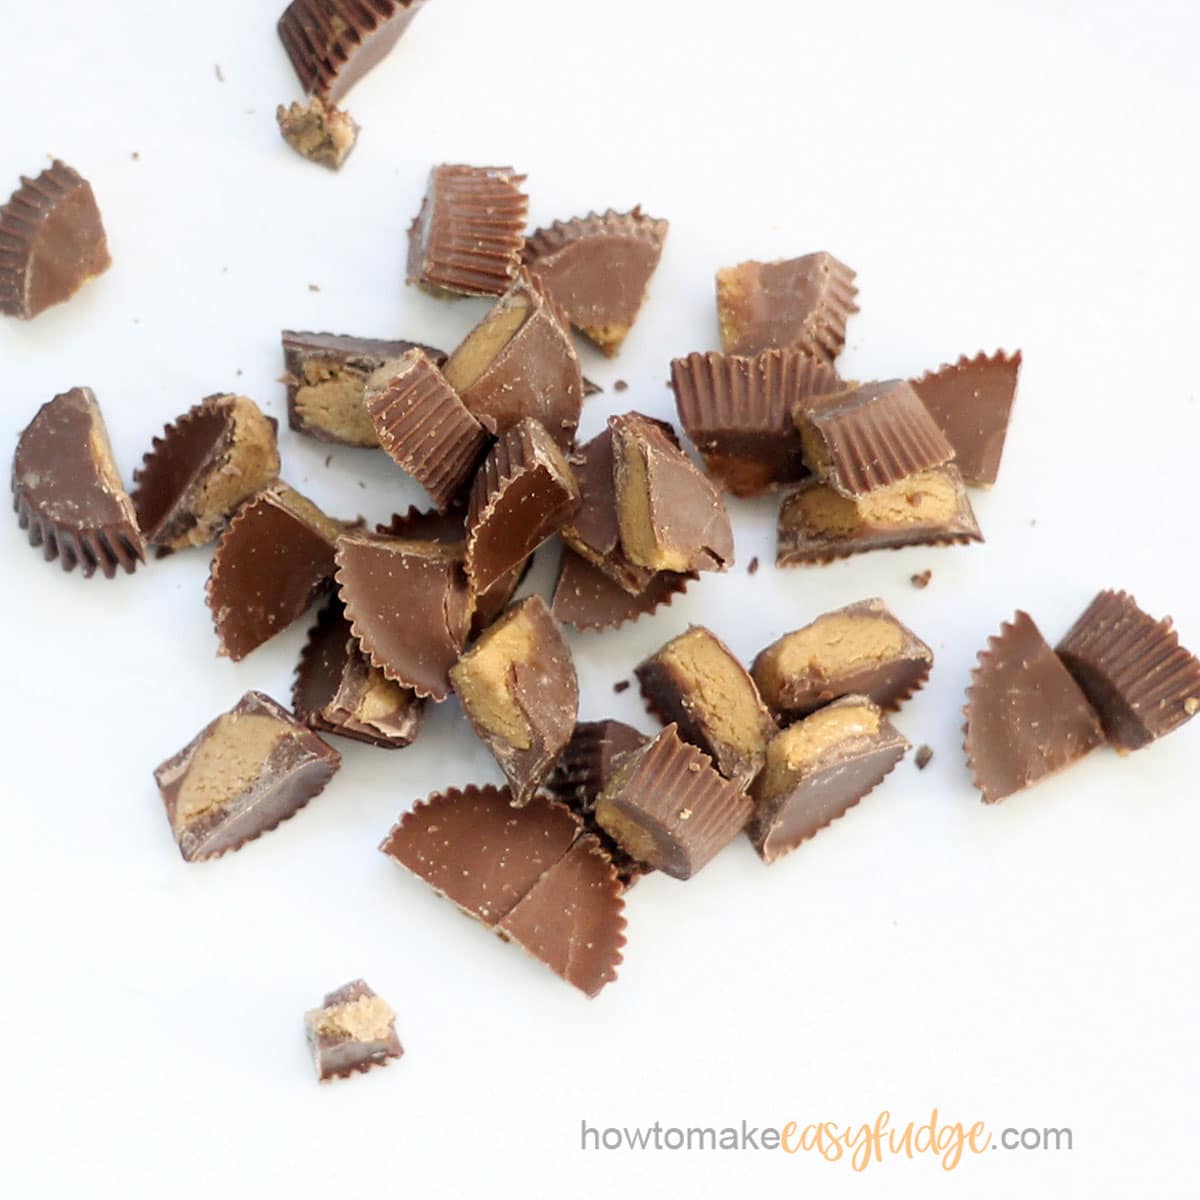 chopped Reese's Peanut Butter Cups